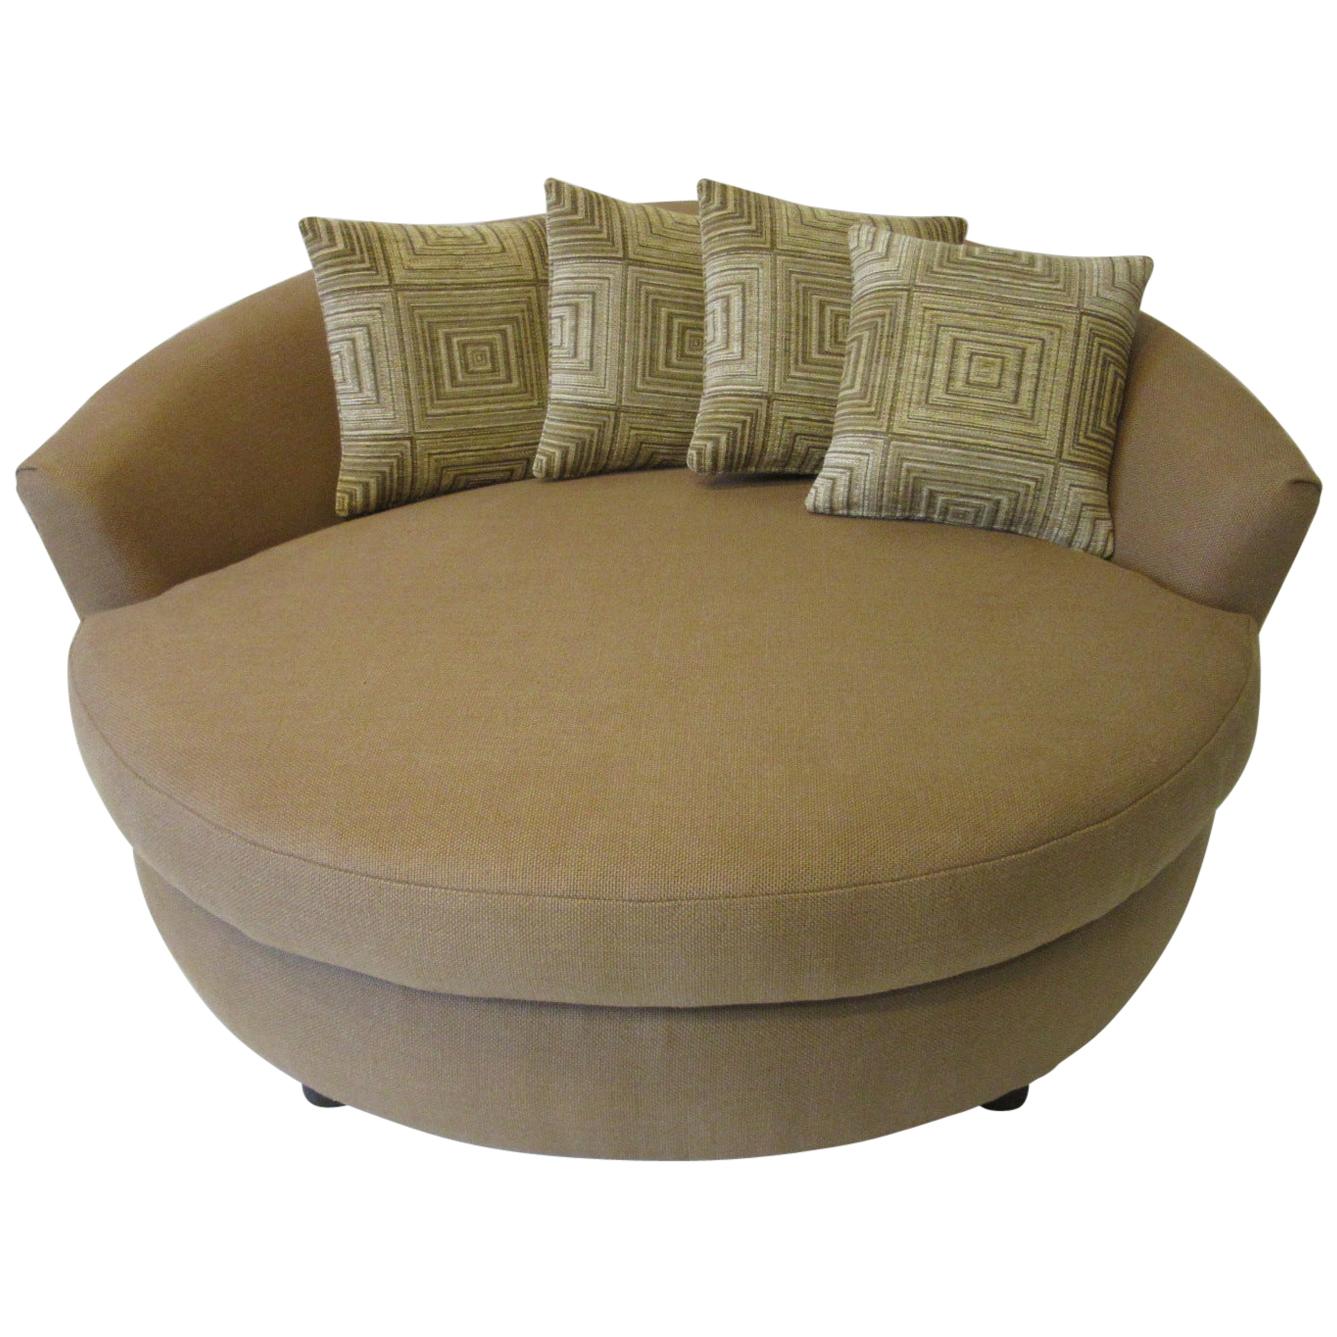 Round Lounger / Sofa Chair in the Style of Baughman / Pearsall